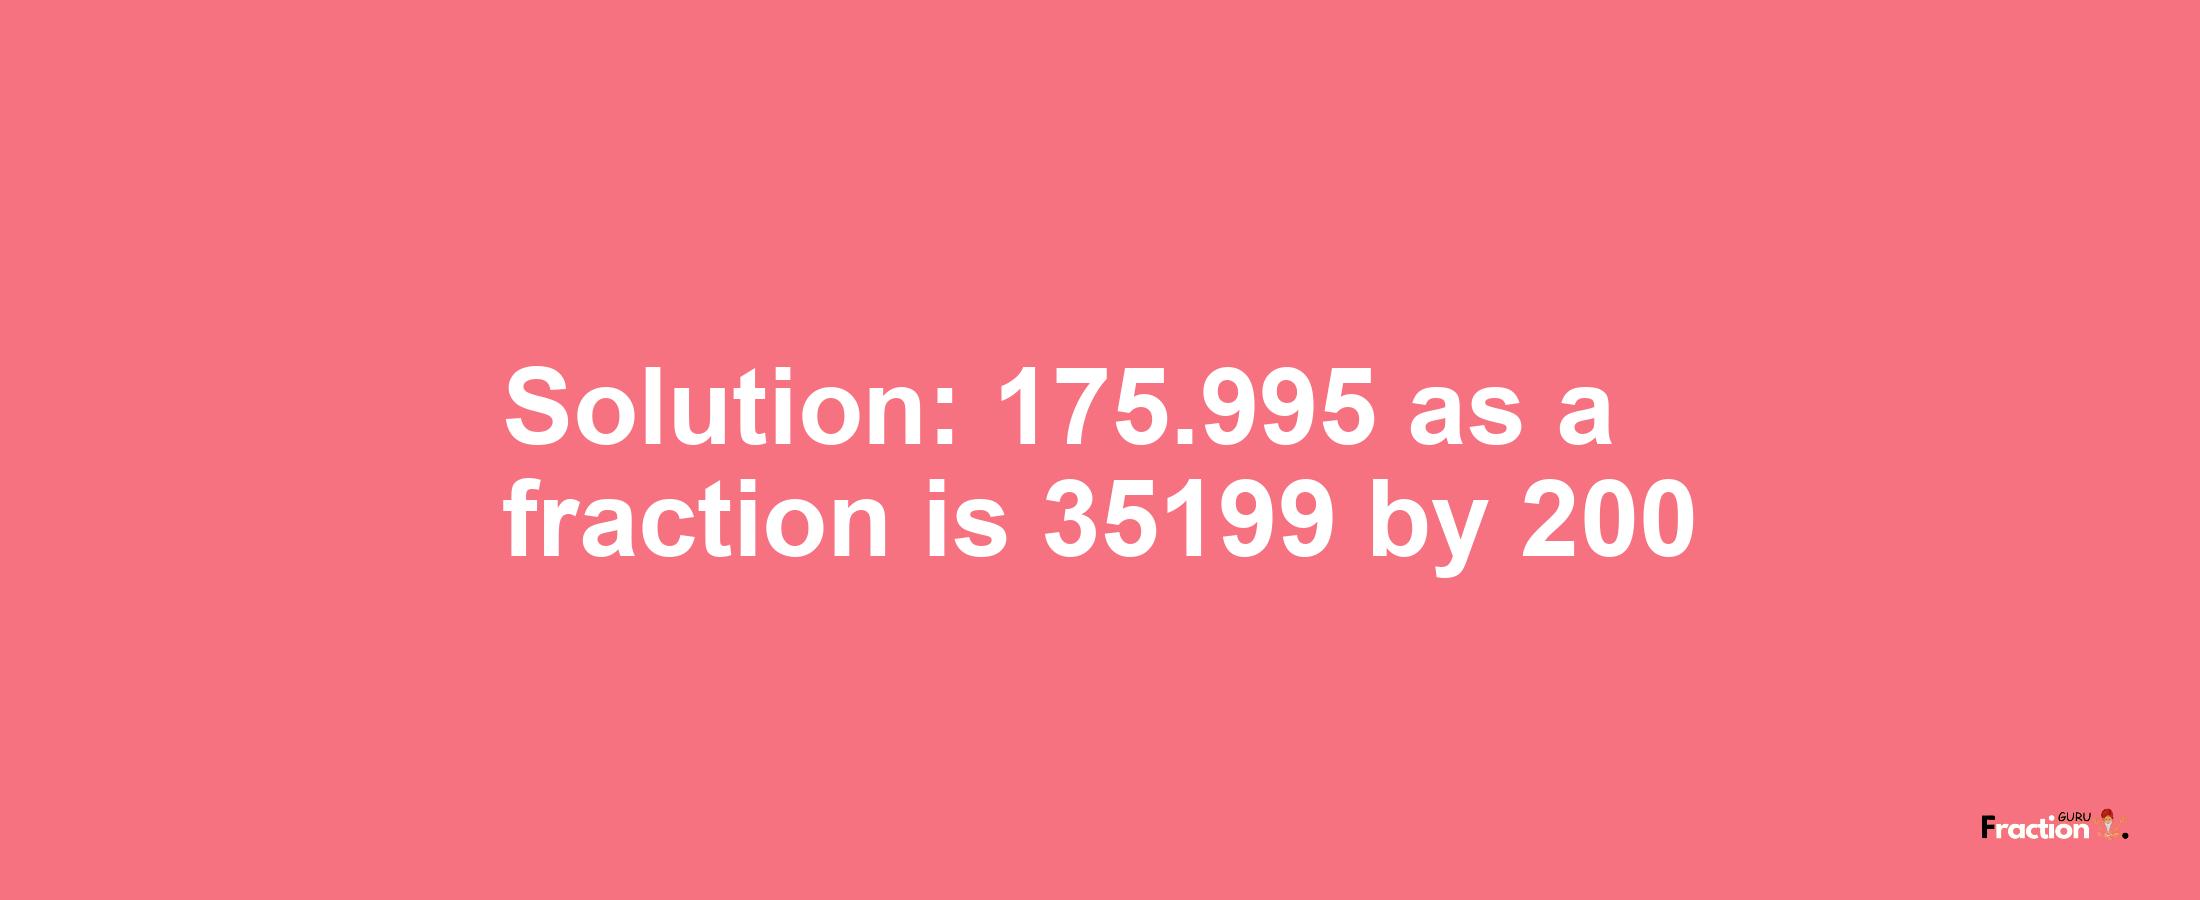 Solution:175.995 as a fraction is 35199/200